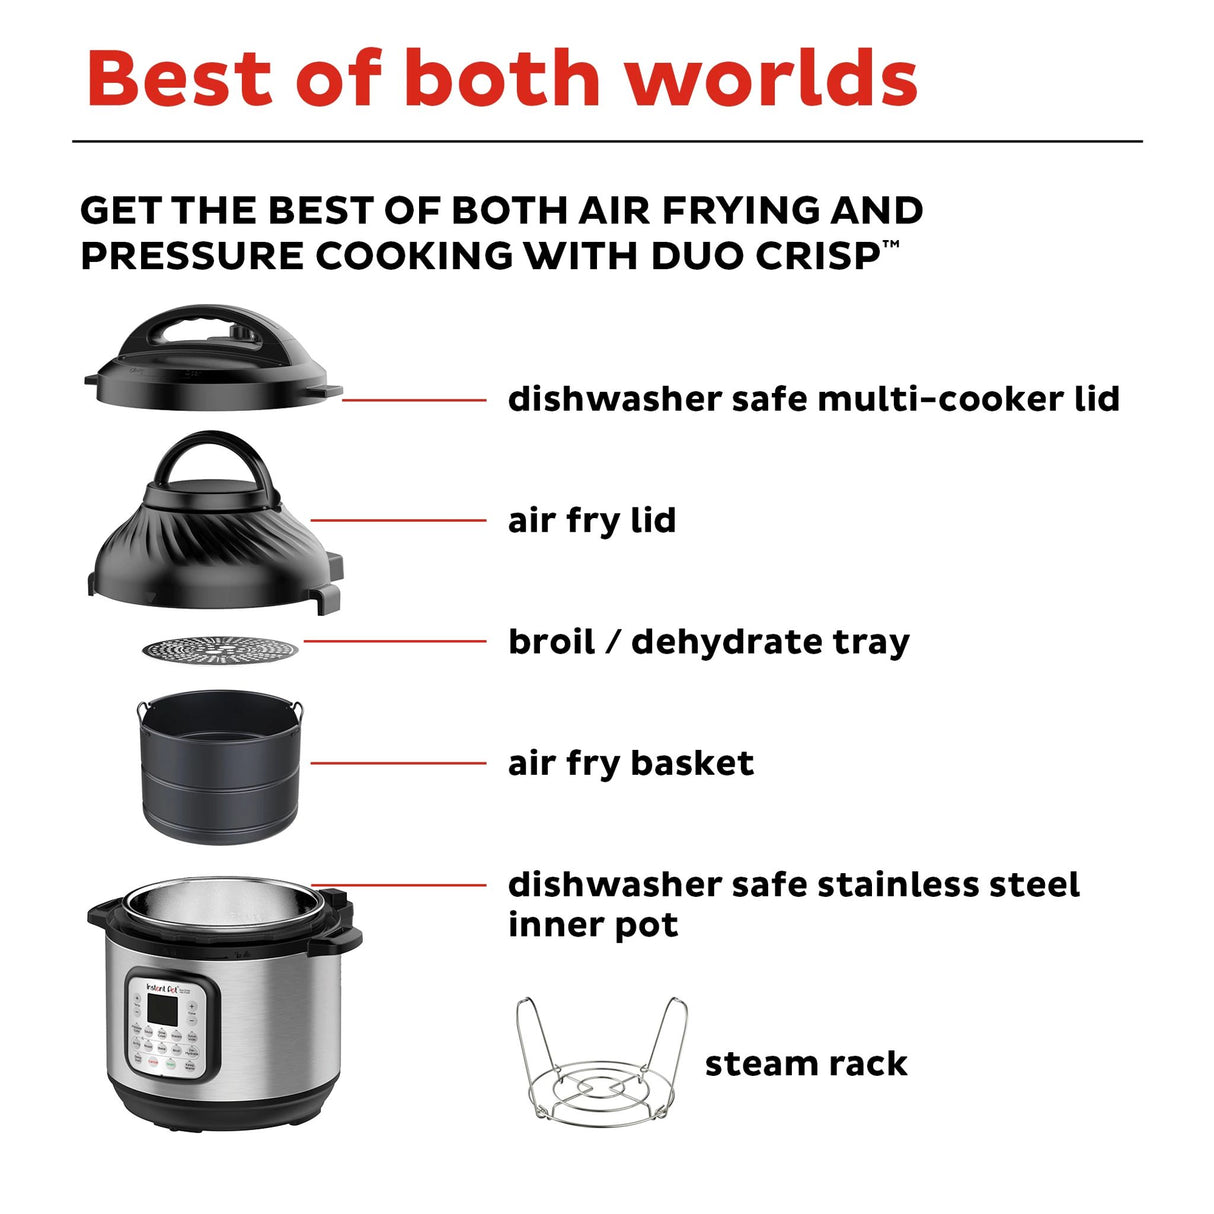  Instant Pot Duo Crisp and Air Fryer 8-quart Multi-Use Pressure Cooker with text Best of both worlds